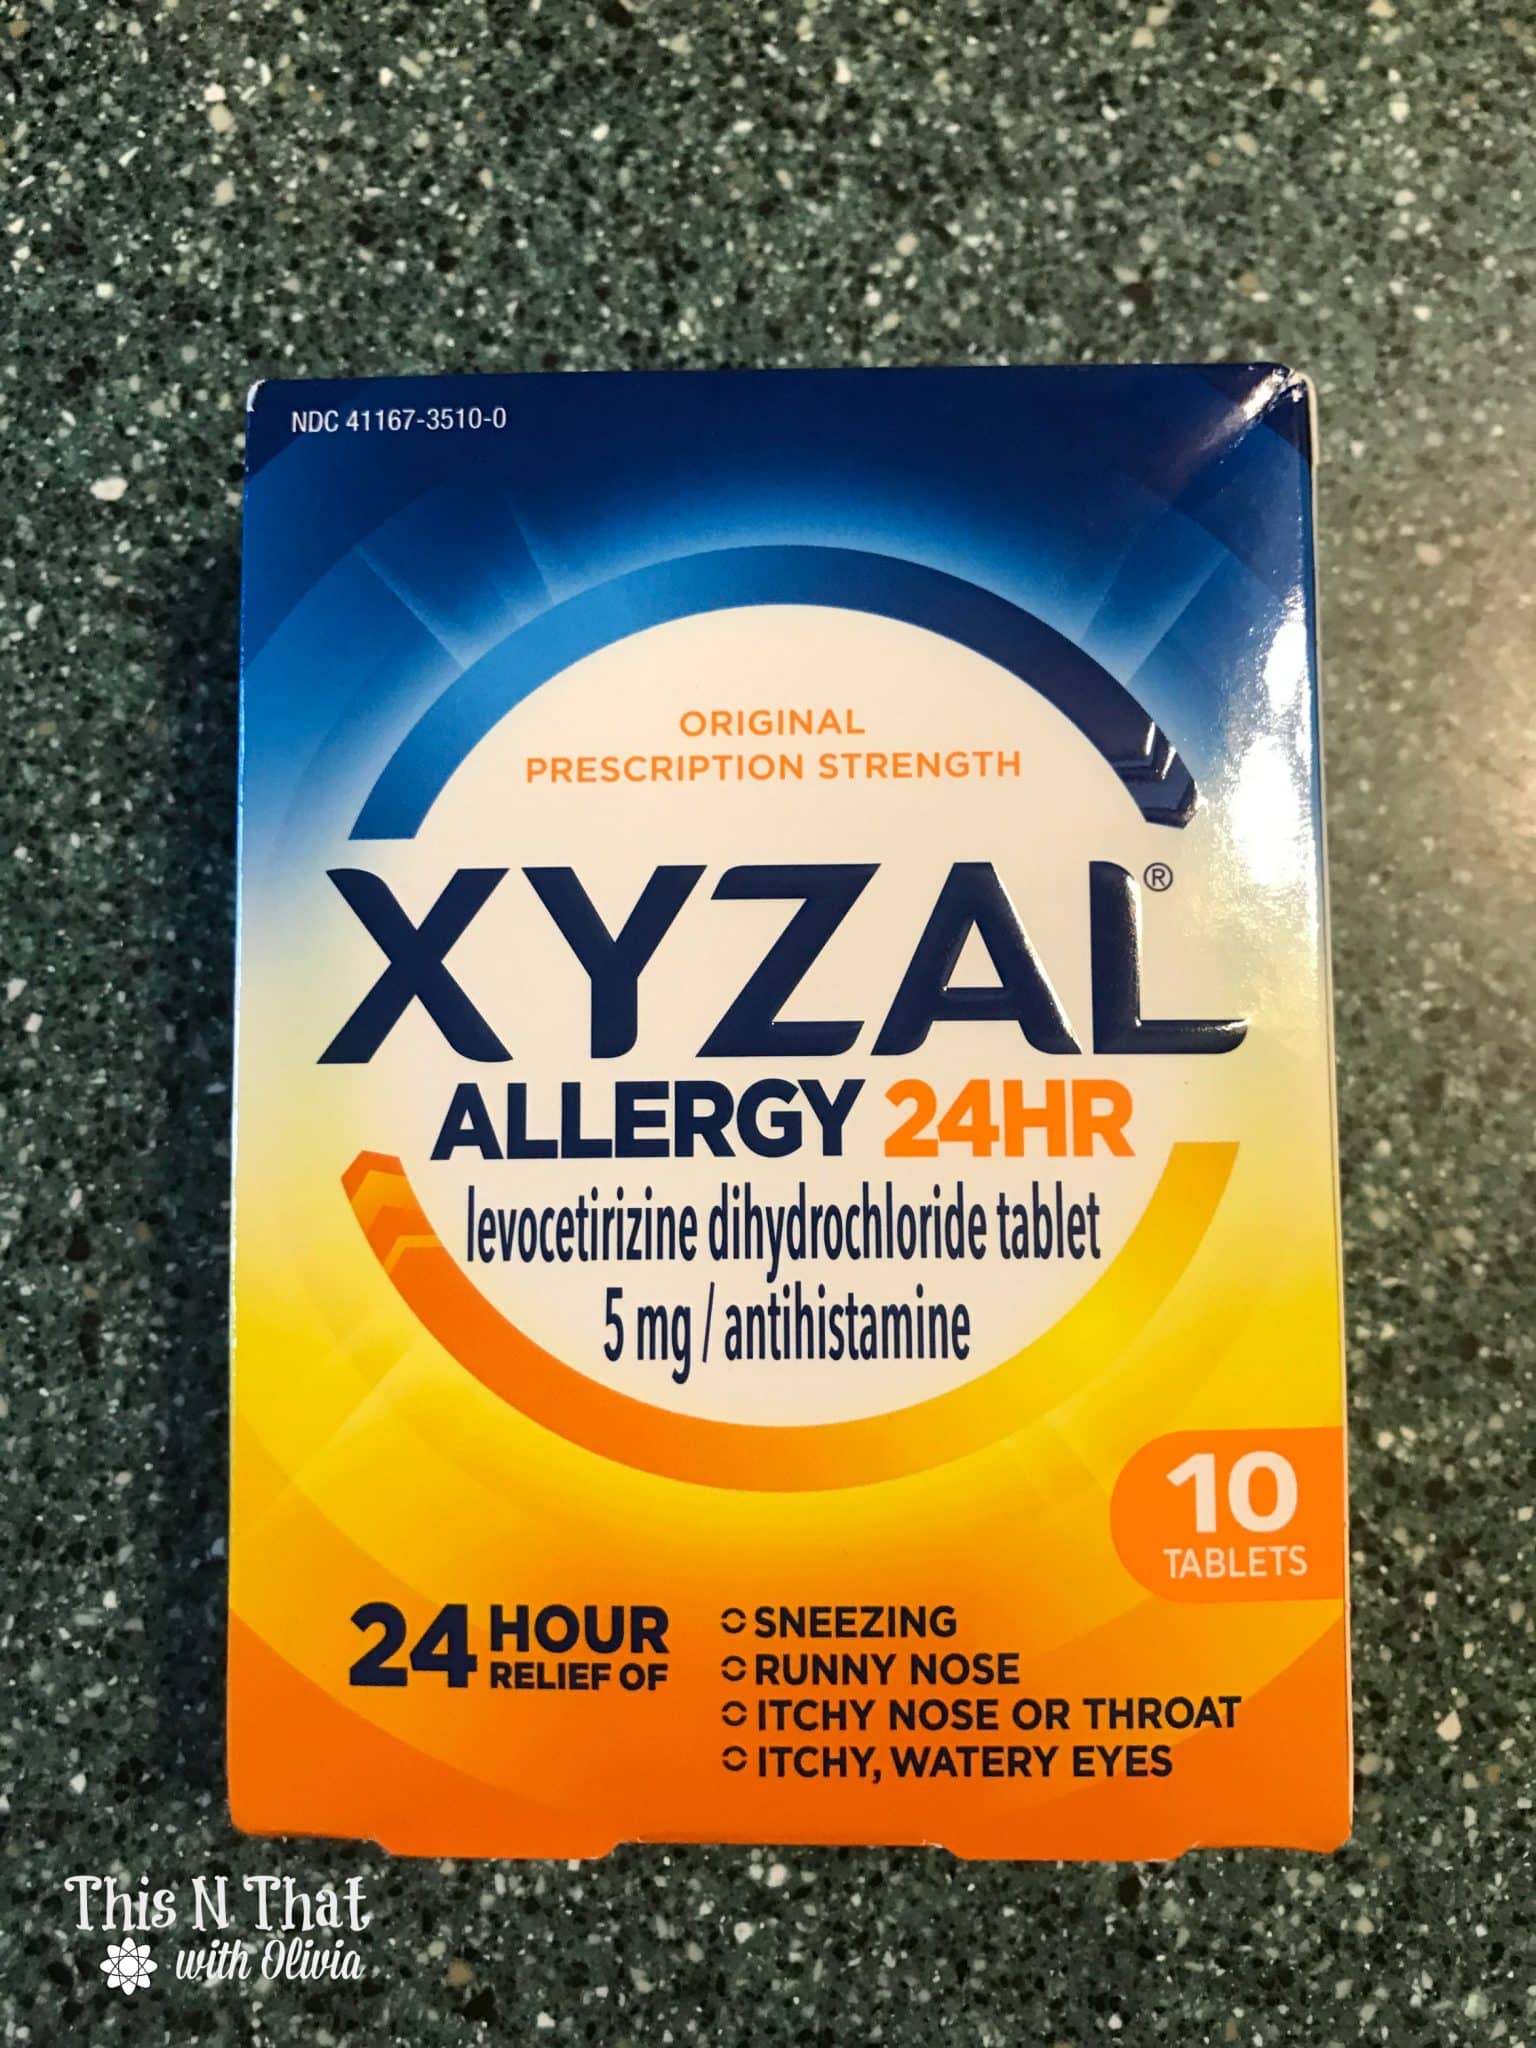 Conquer Allergies with Xyzal®Allergy 24 HR #ForgetAllergies